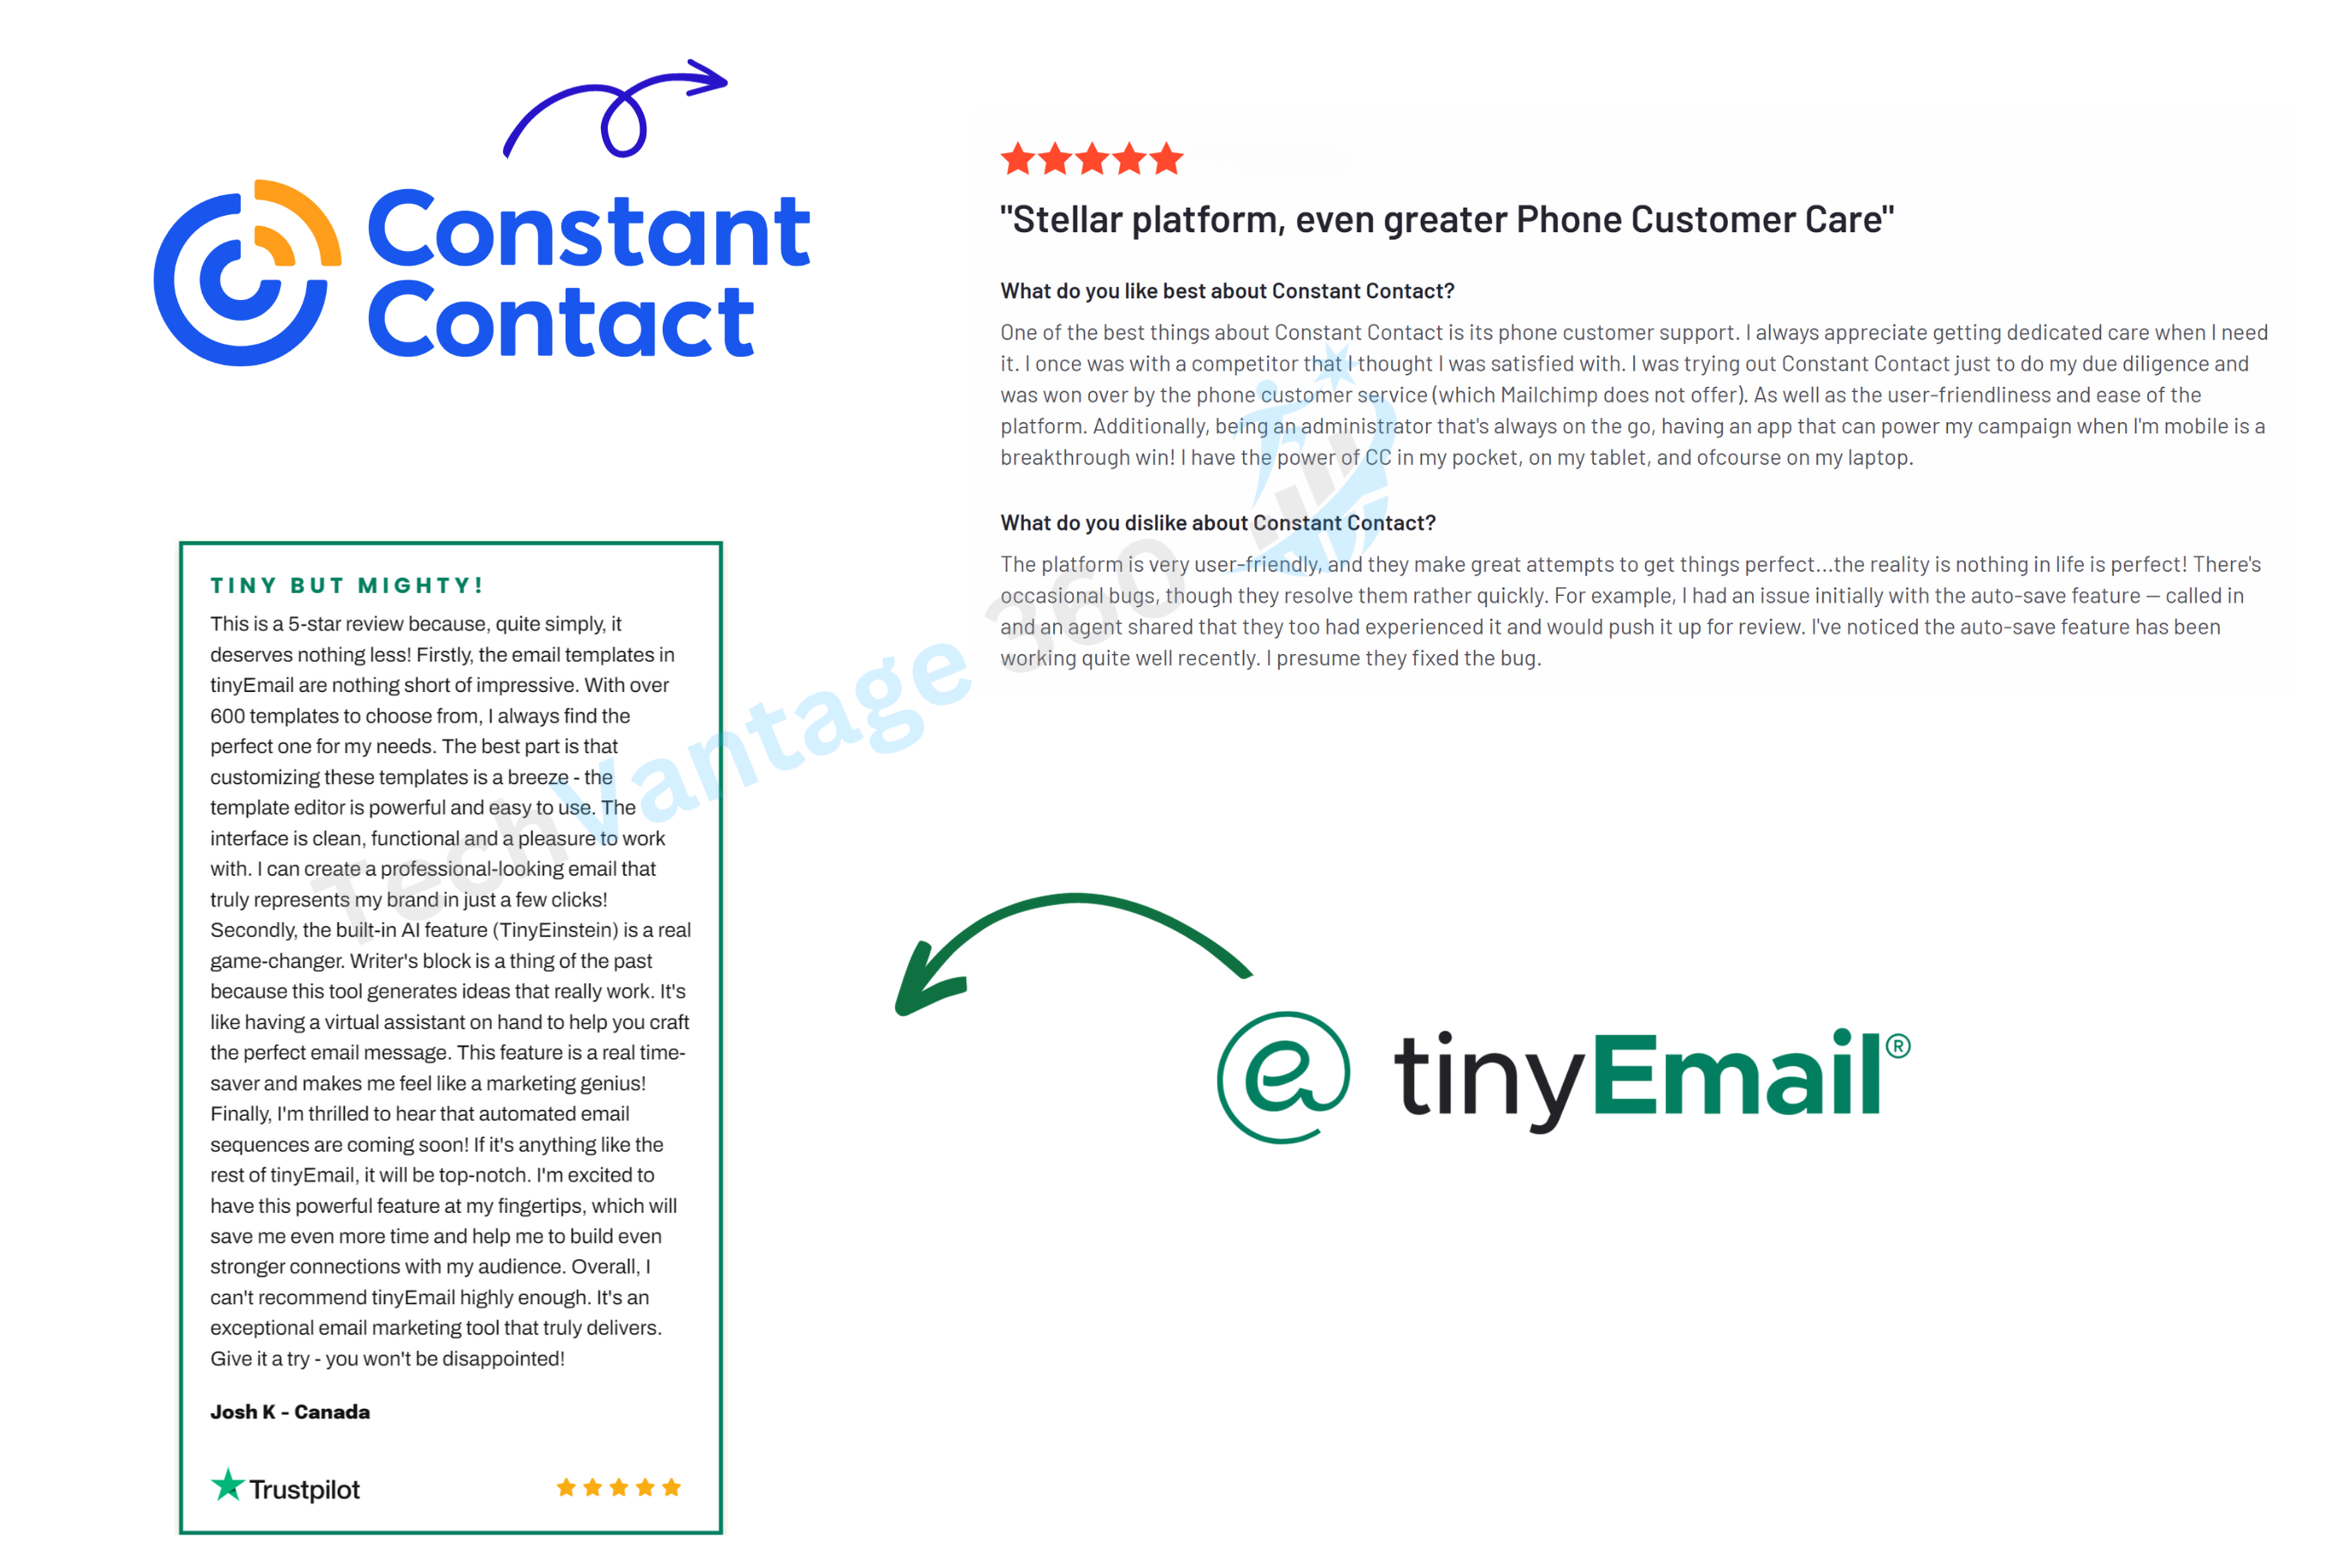 Constant Contact vs tinyEmail reviews